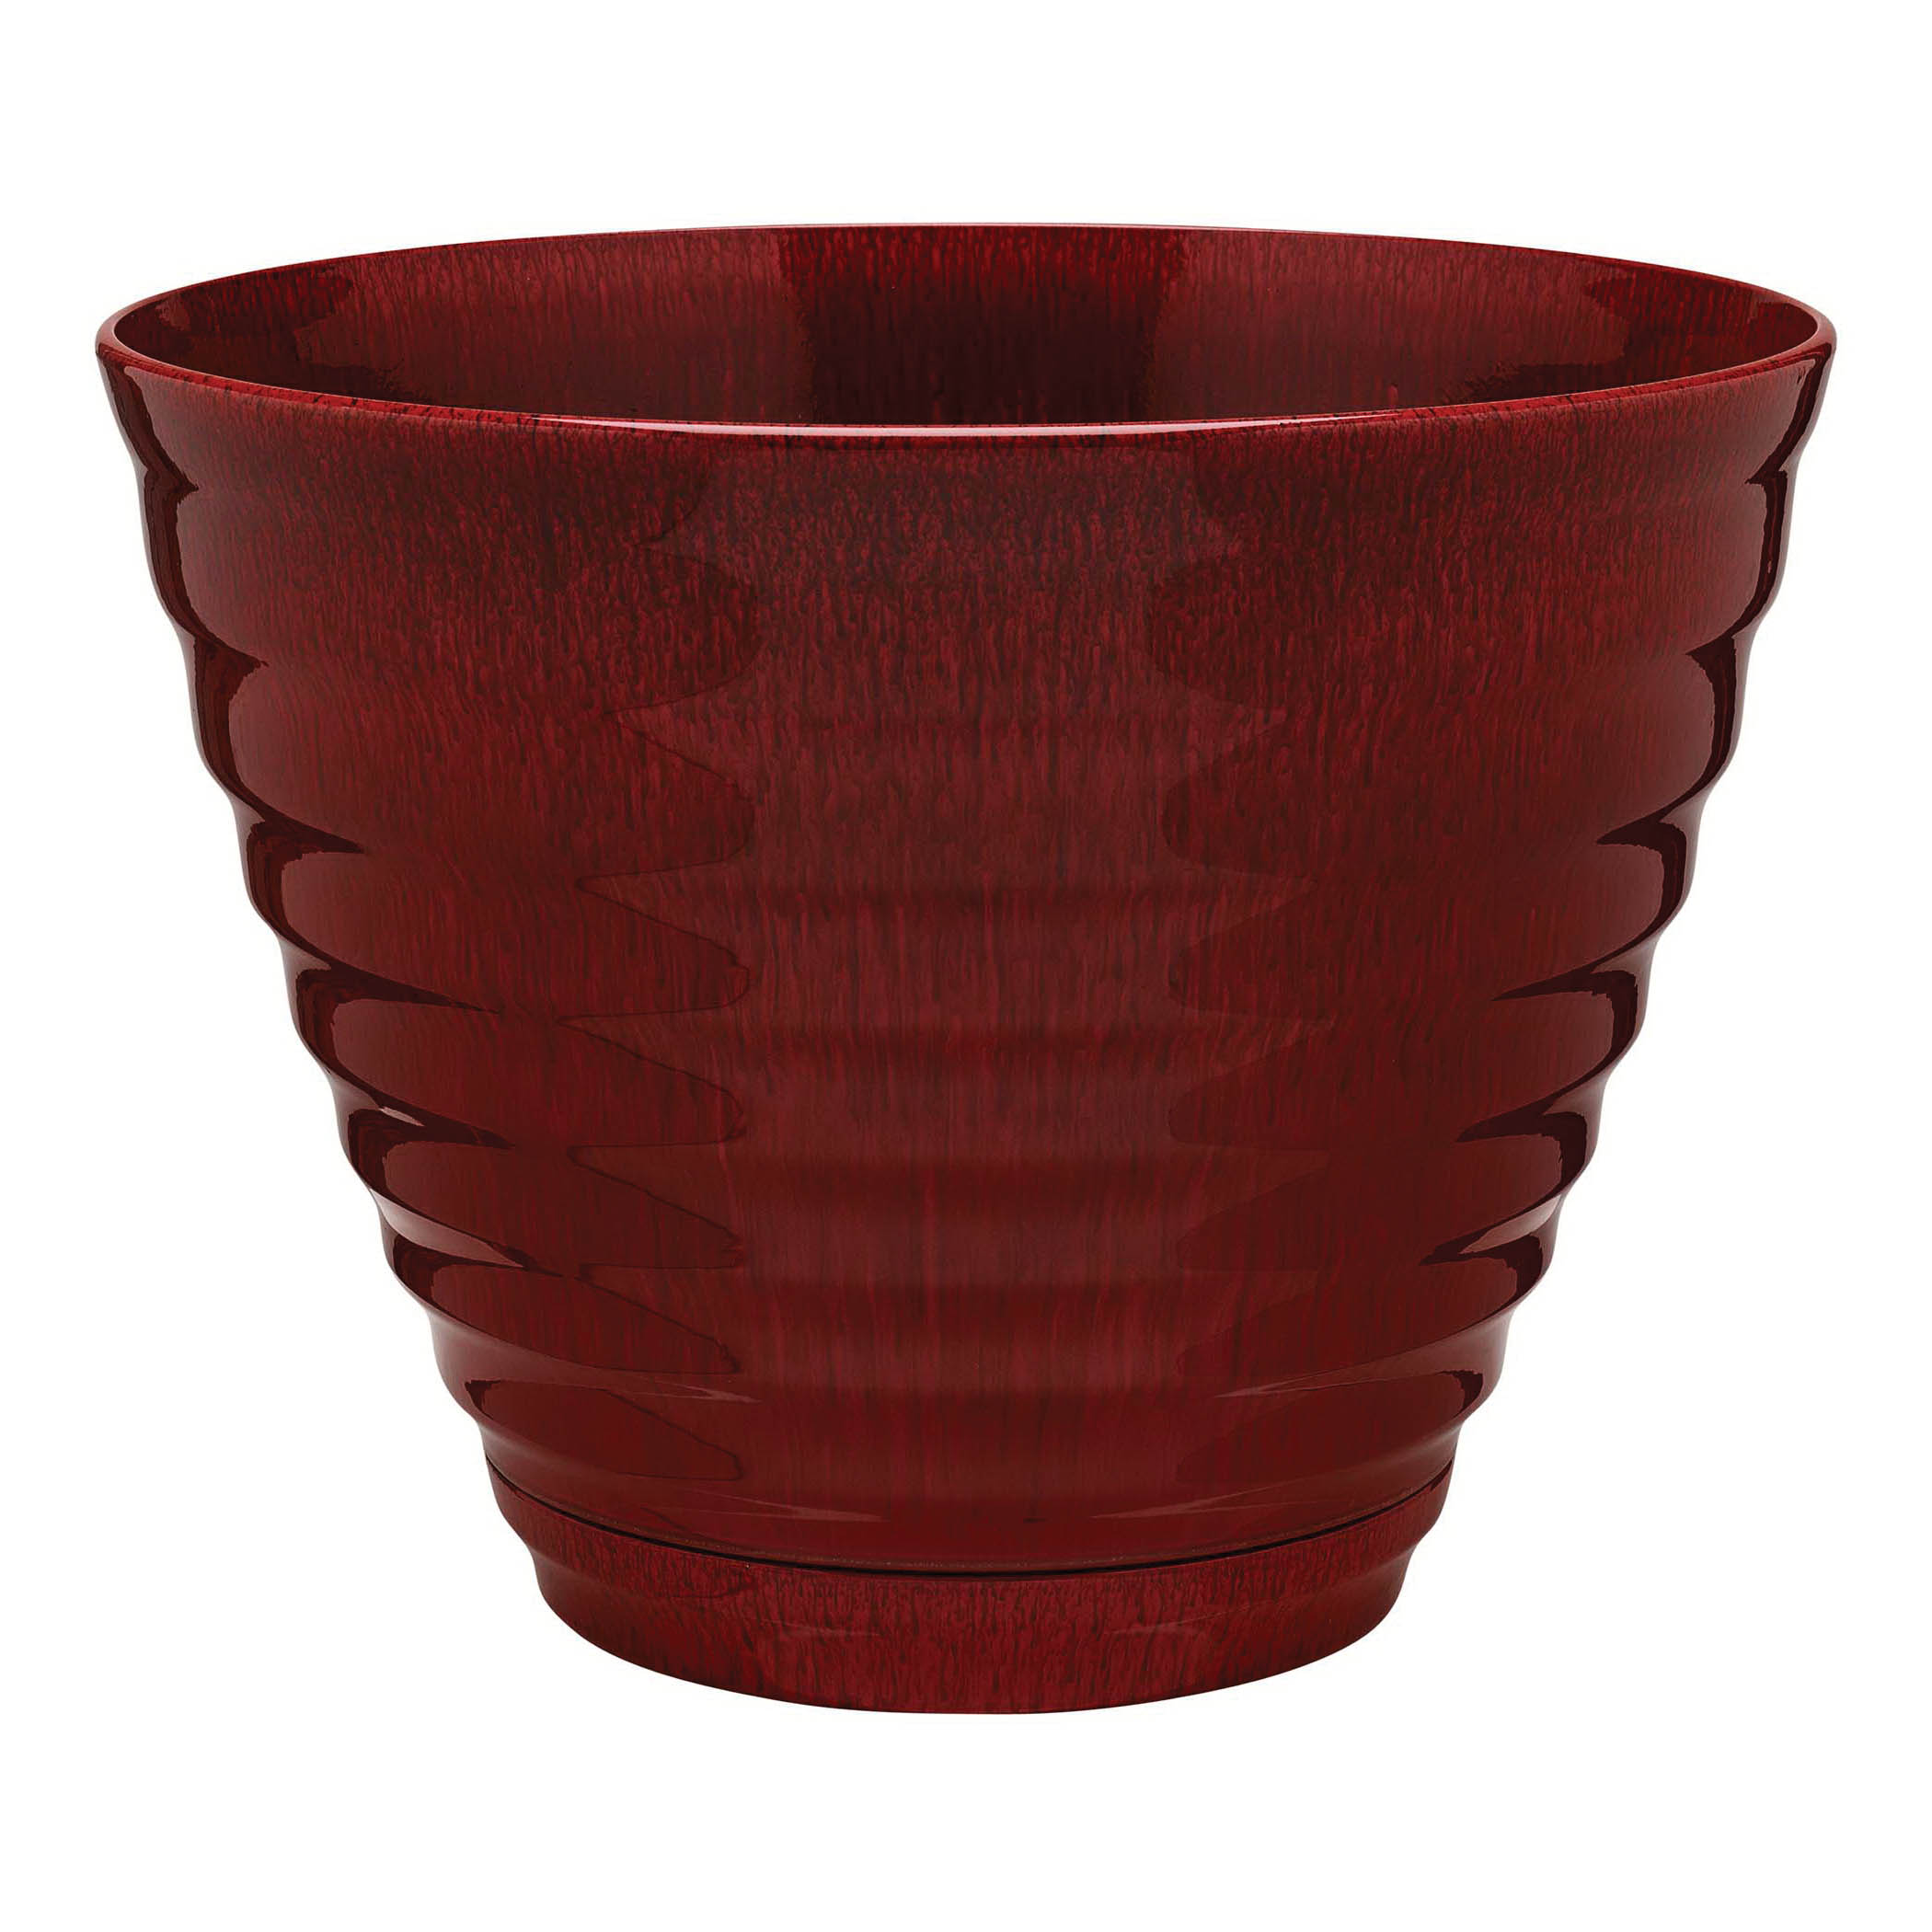 HDR-064763 Planter, 15.9 in Dia, 12.3 in H, Round, Beehive Design, Resin, Red